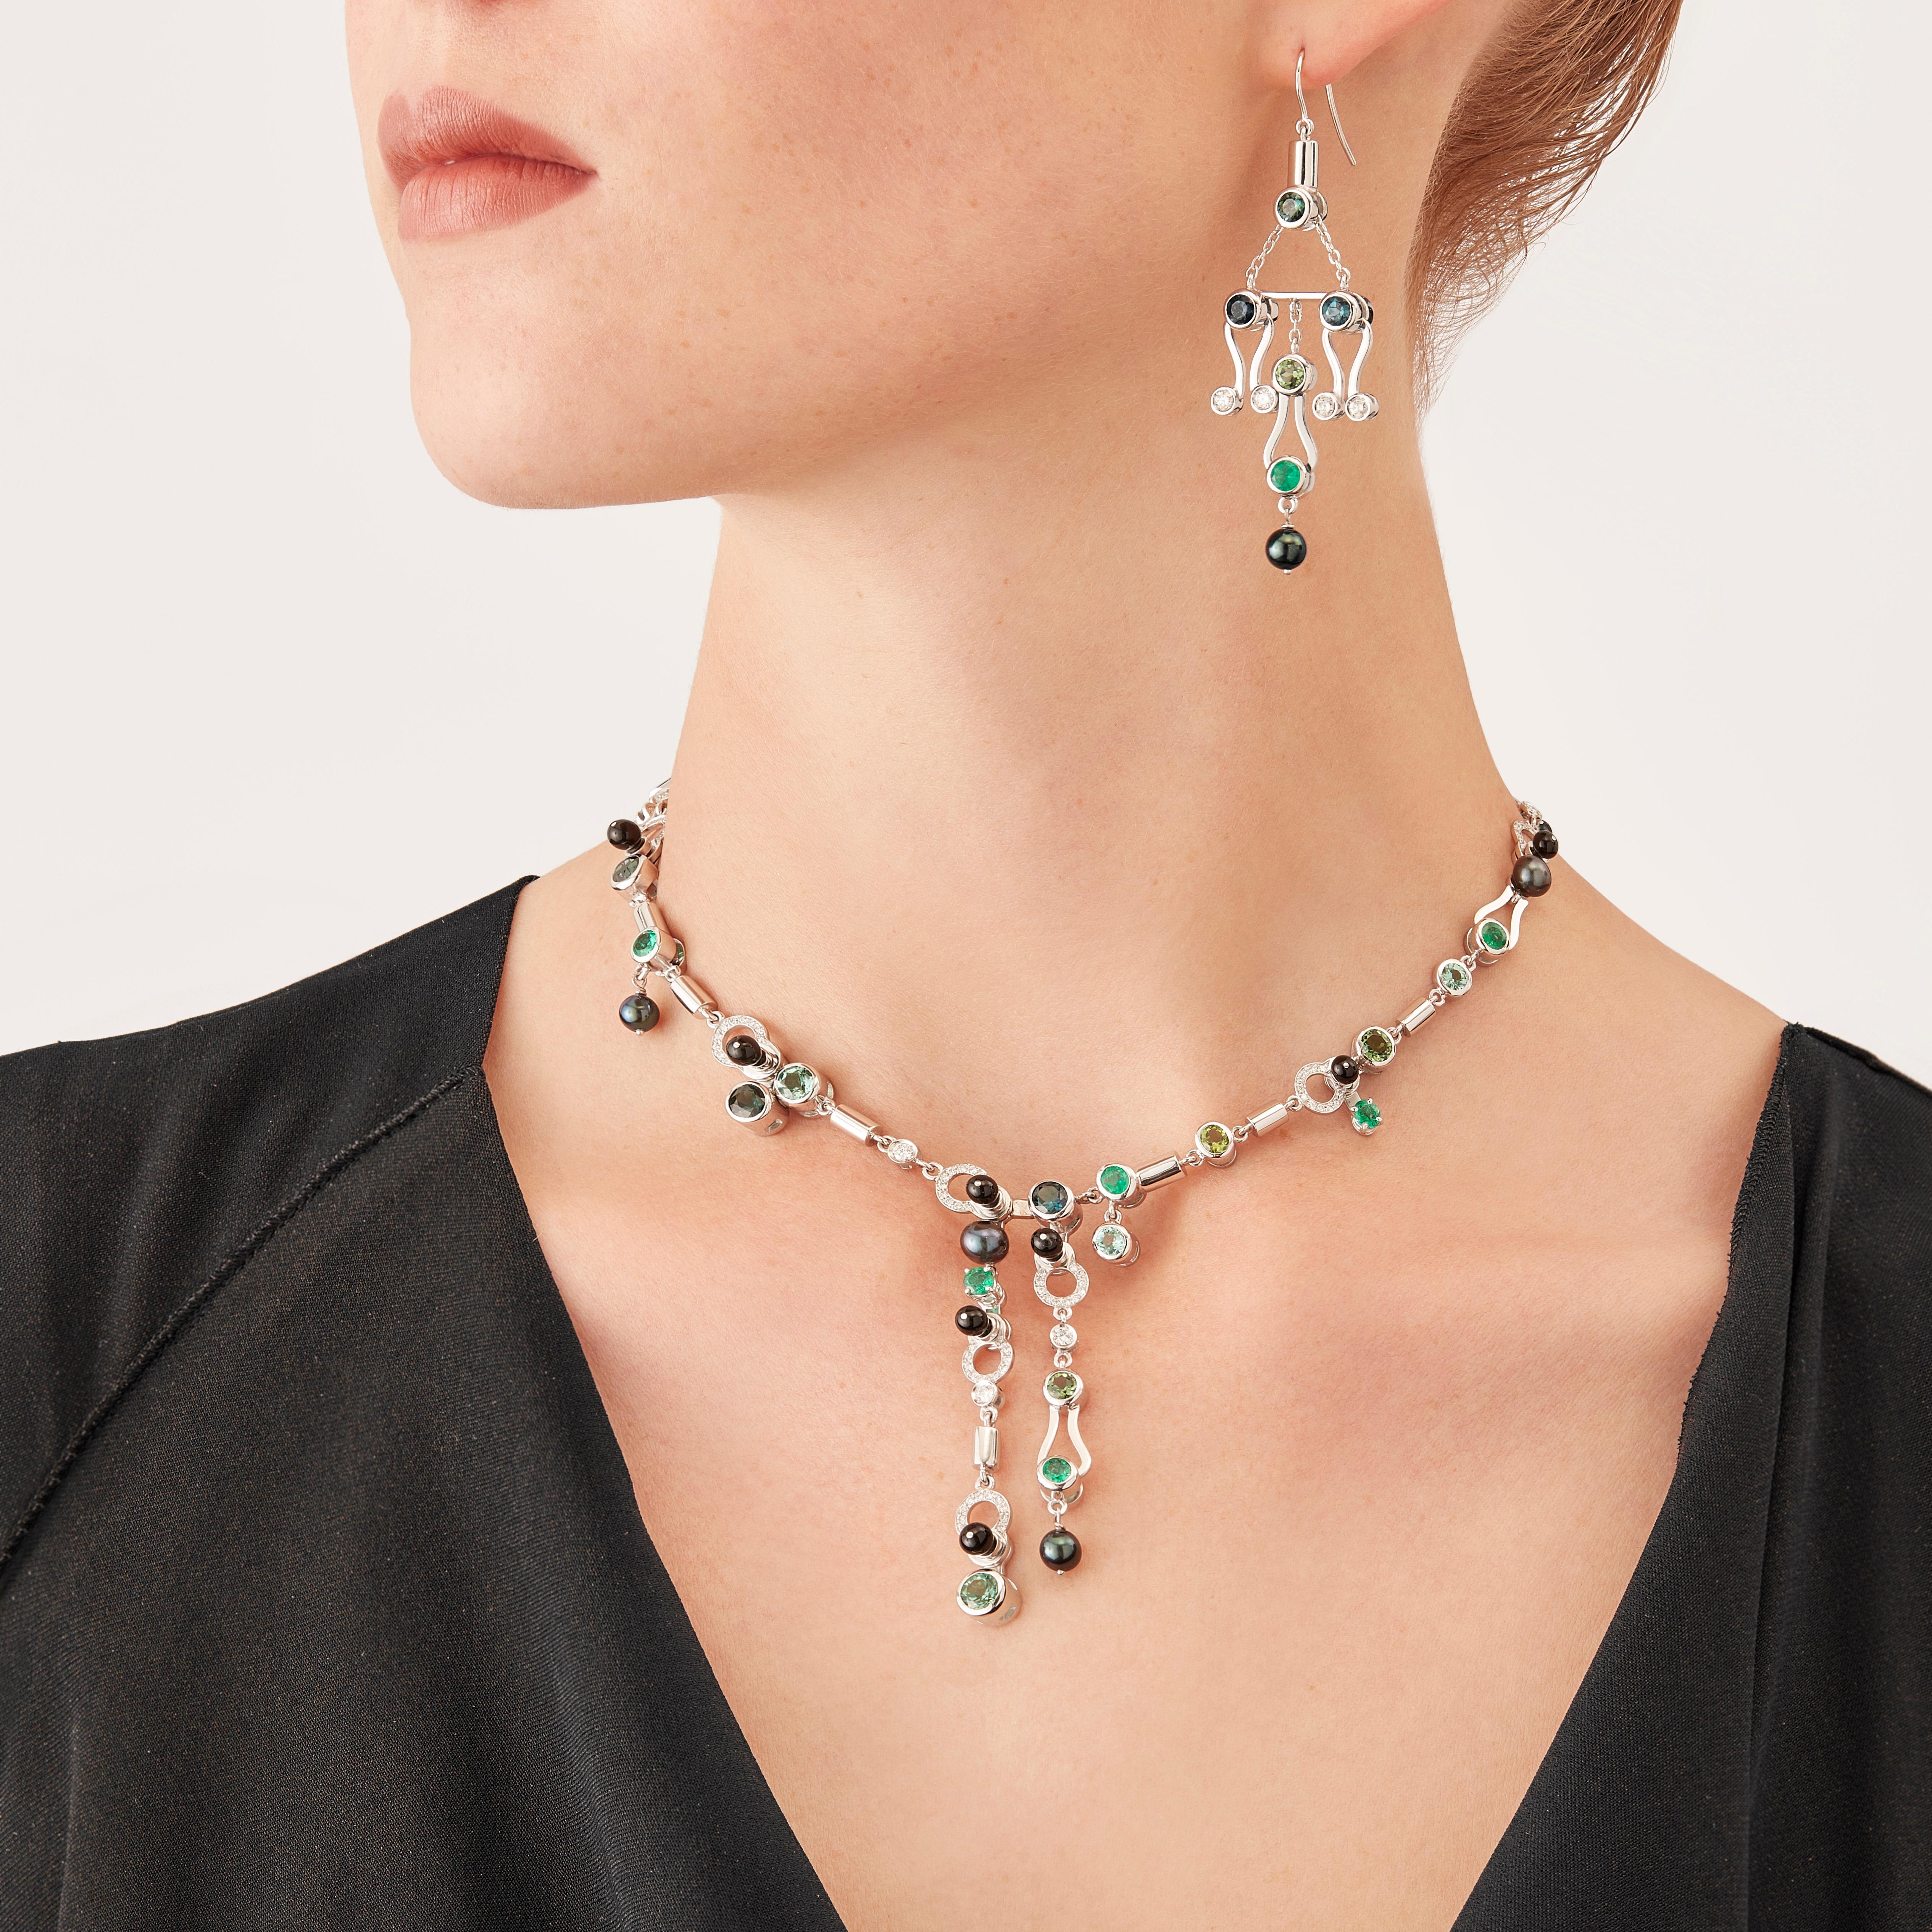 Microrock Necklace is devised as a game, a construction or a sophisticated aerial mobile. Shapes attached to gold rings dangle lightly on the hand, their geometry pierced by diamond (total carat weight 0,79), emerald, green tourmaline, indicolite,